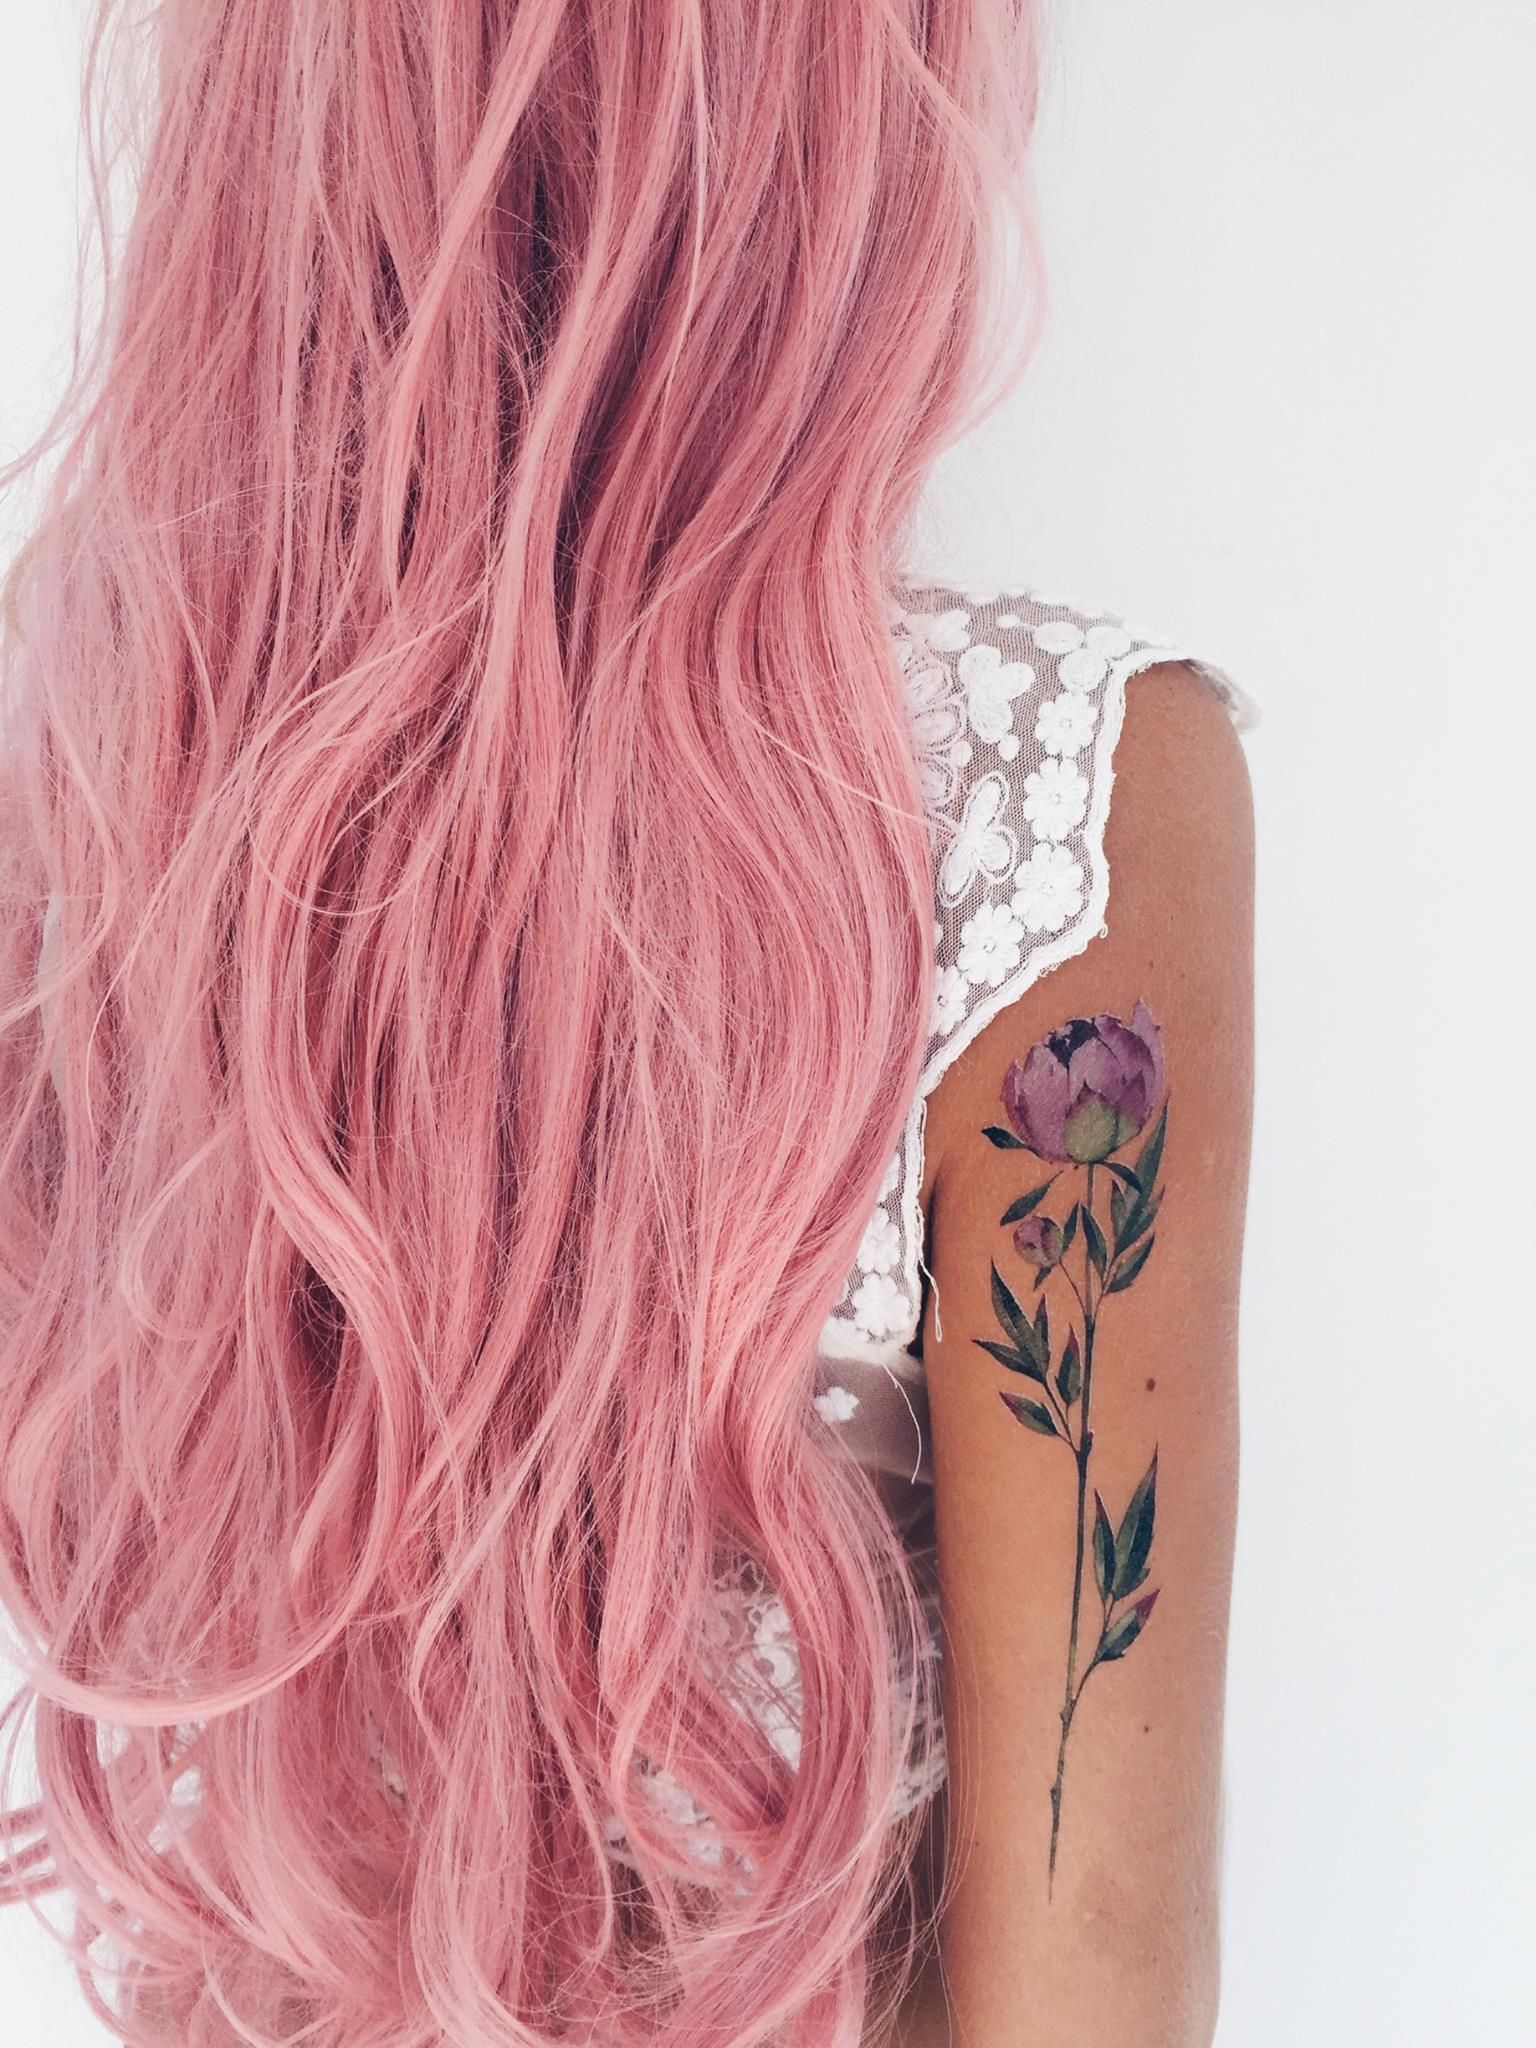 36 Incredible Rose Tattoo Designs to Make Your Friends Envious